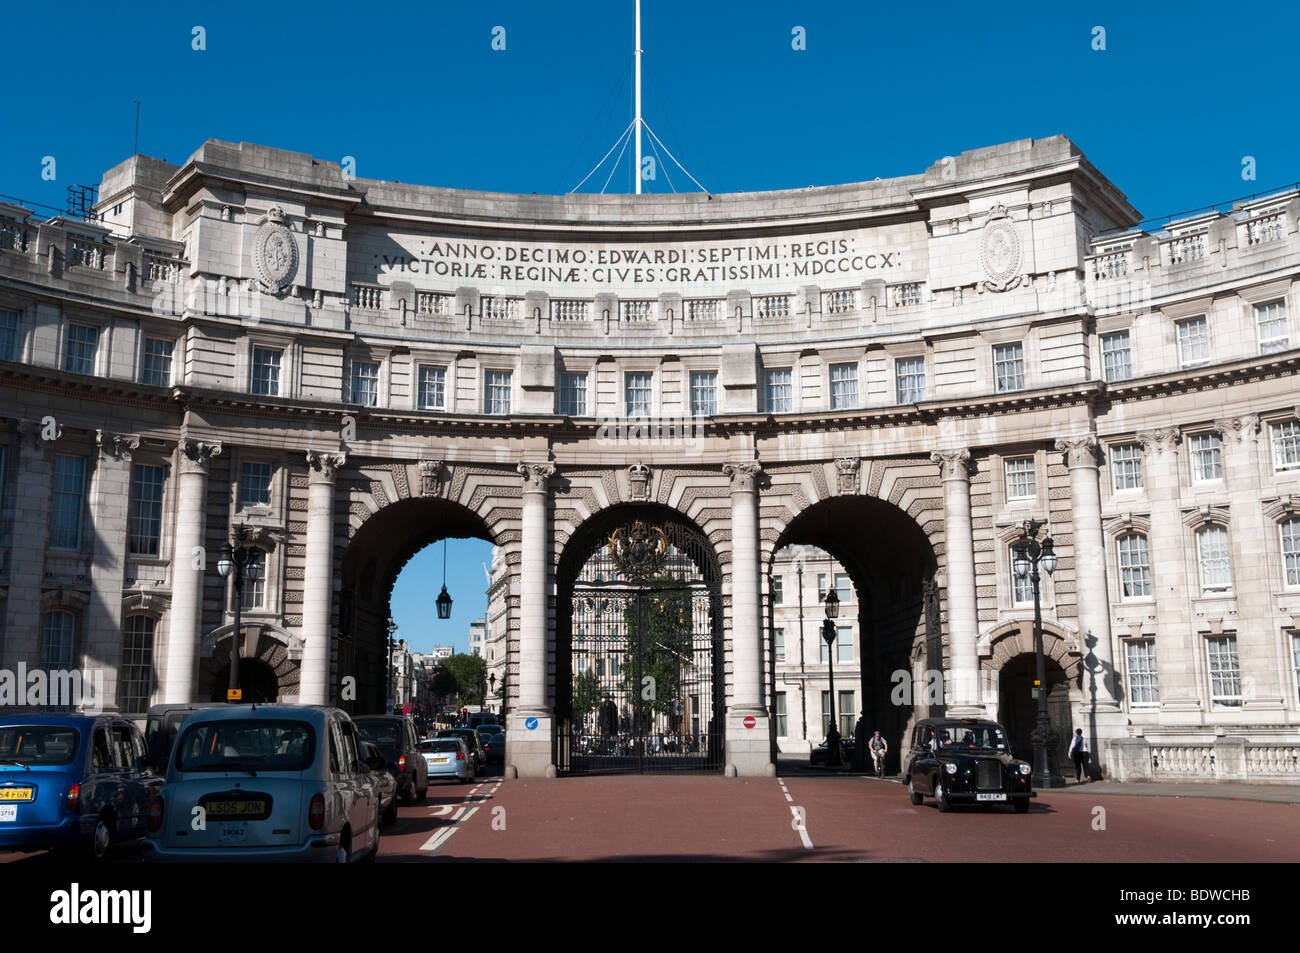 Admiralty Arch on the Mall, London, England, Britain, UK Stock Photo